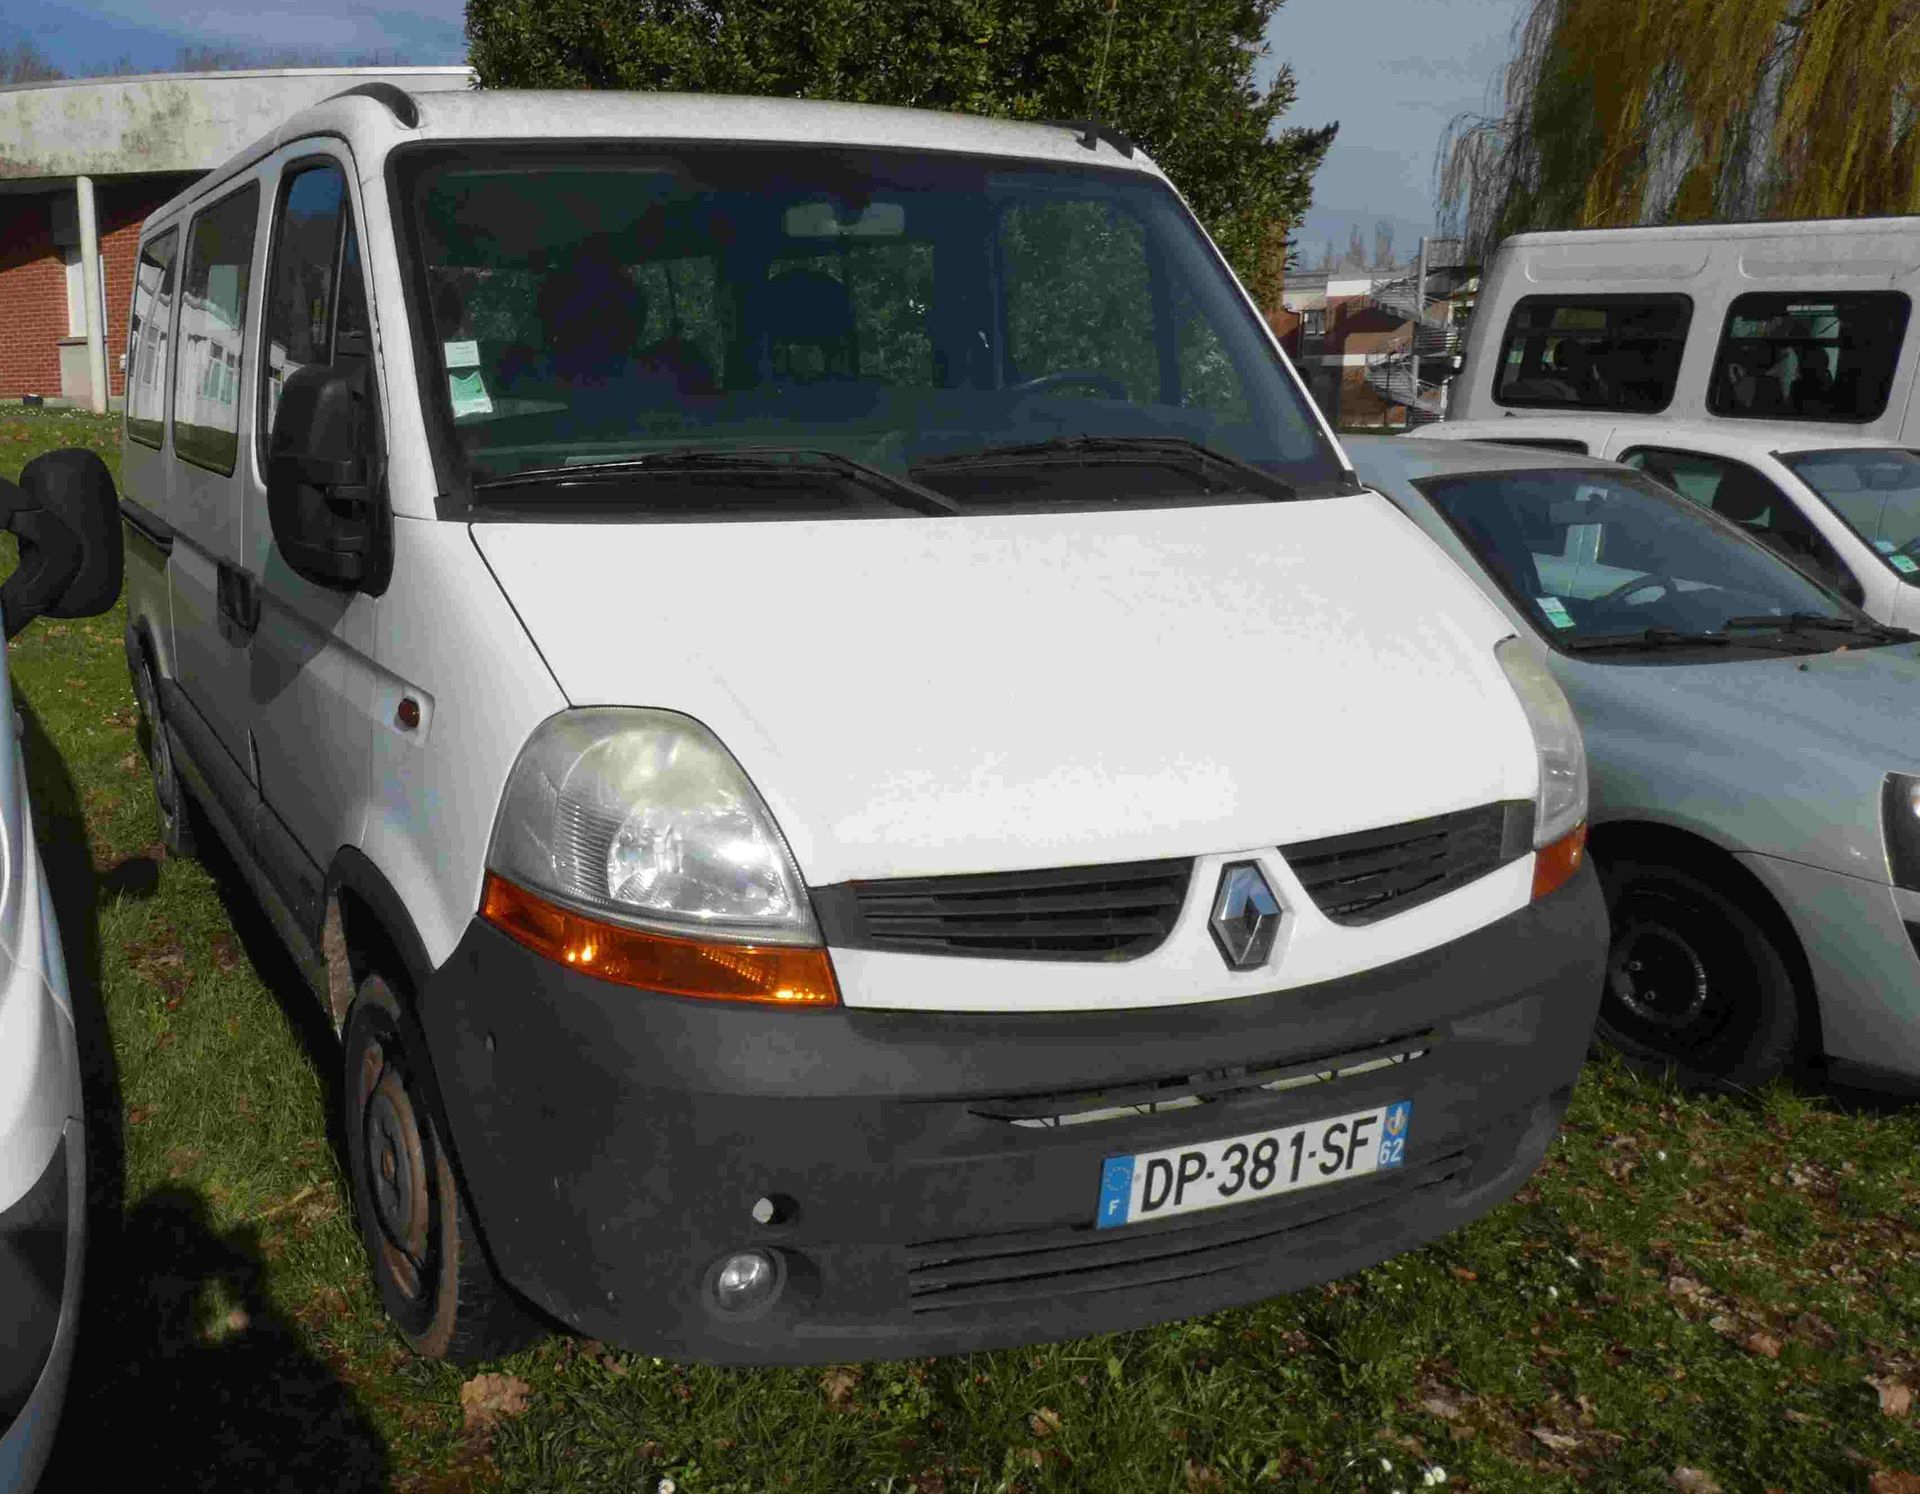 Null [CT] RENAULT MASTER II 2.5 DCI 120 CV, 9 places, Gazole, imm. DP-381-SF, ty&hellip;